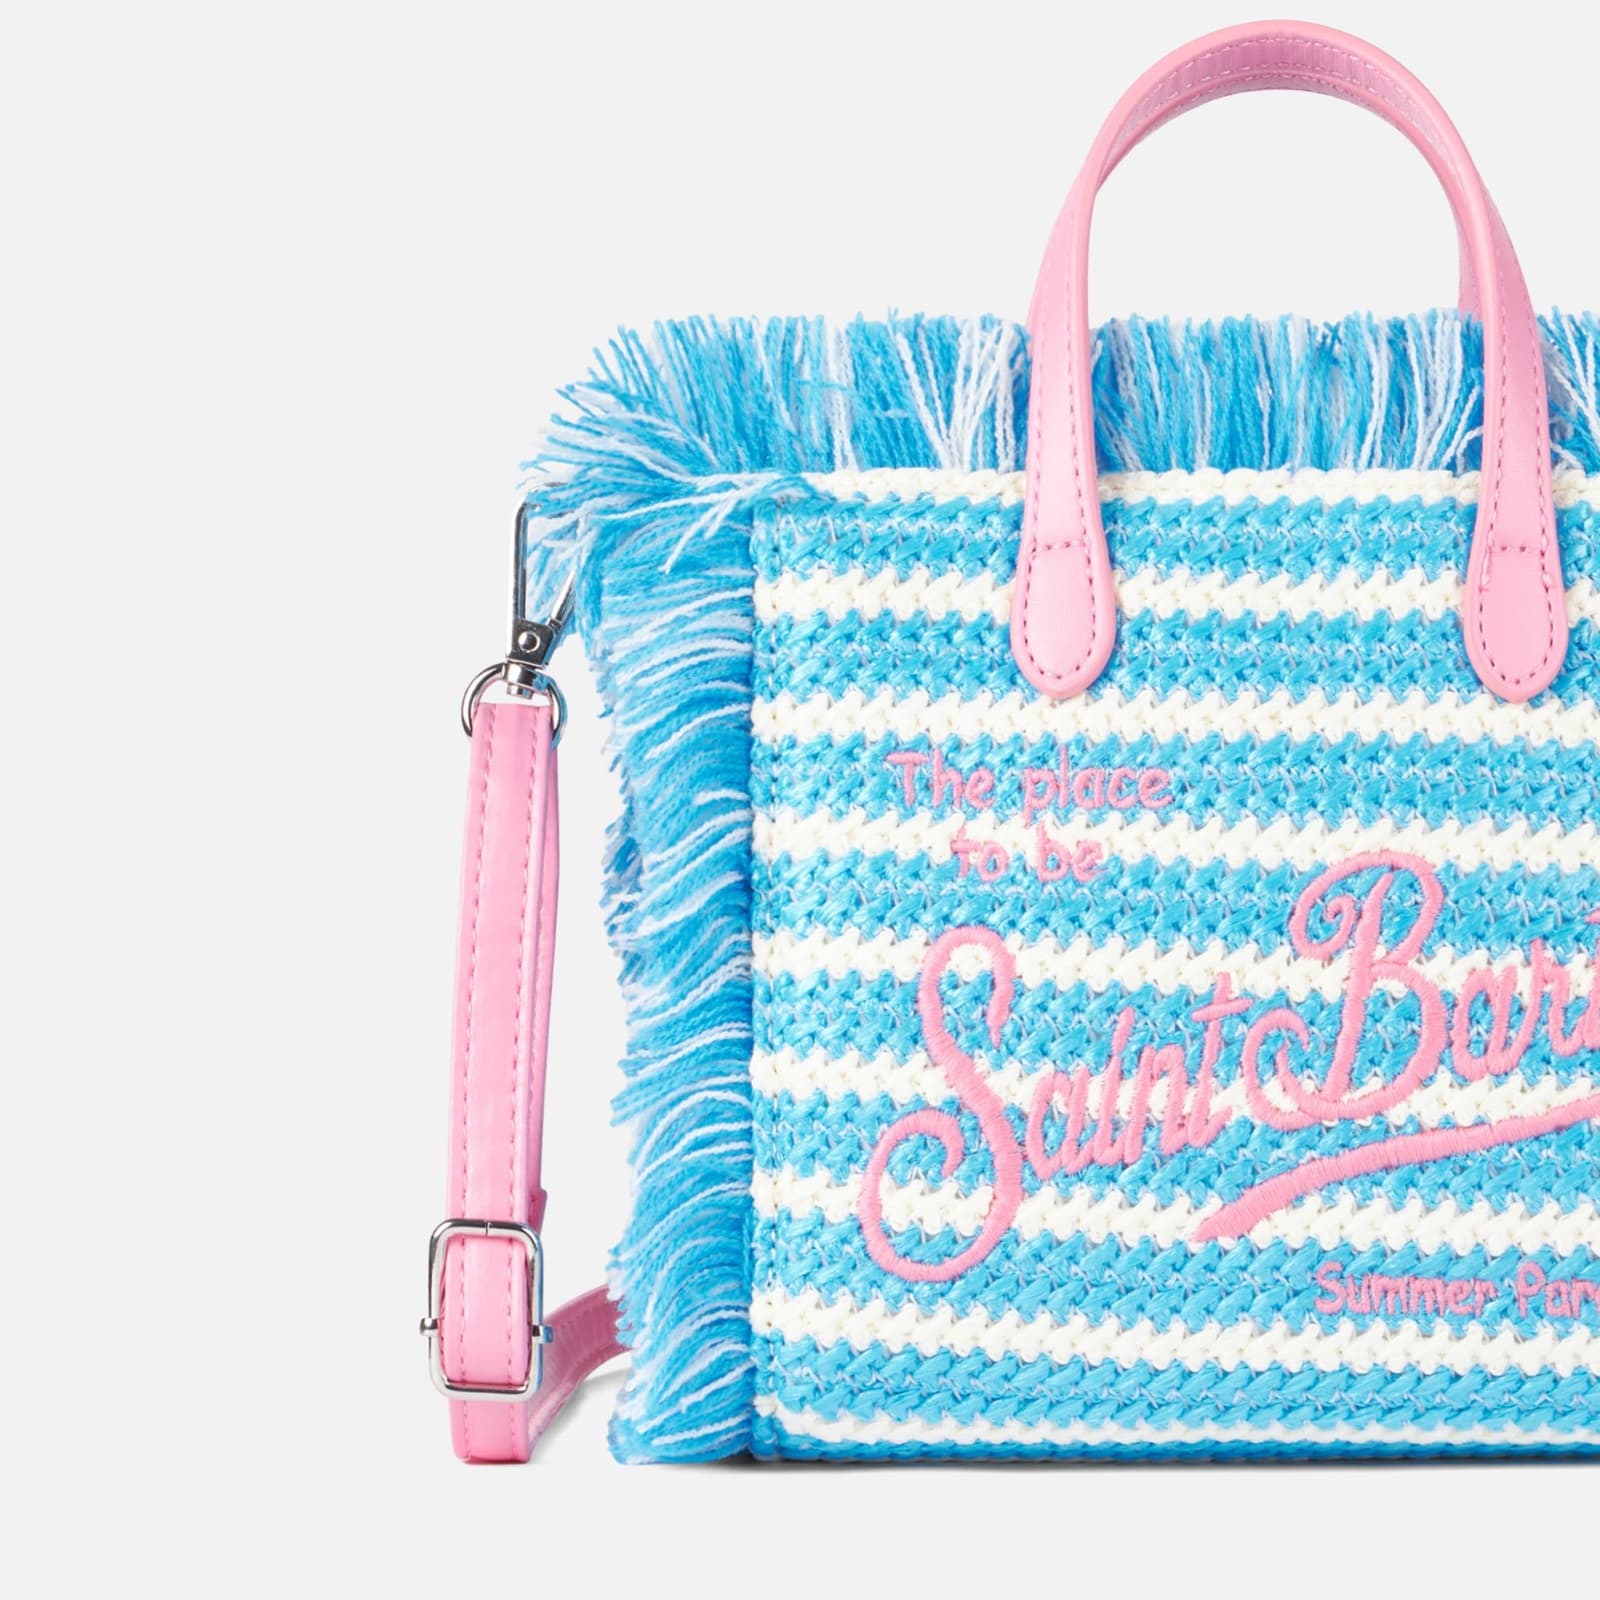 Shop Mc2 Saint Barth Mini Vanity Straw Bag With Embroidery And Stripes In Sky